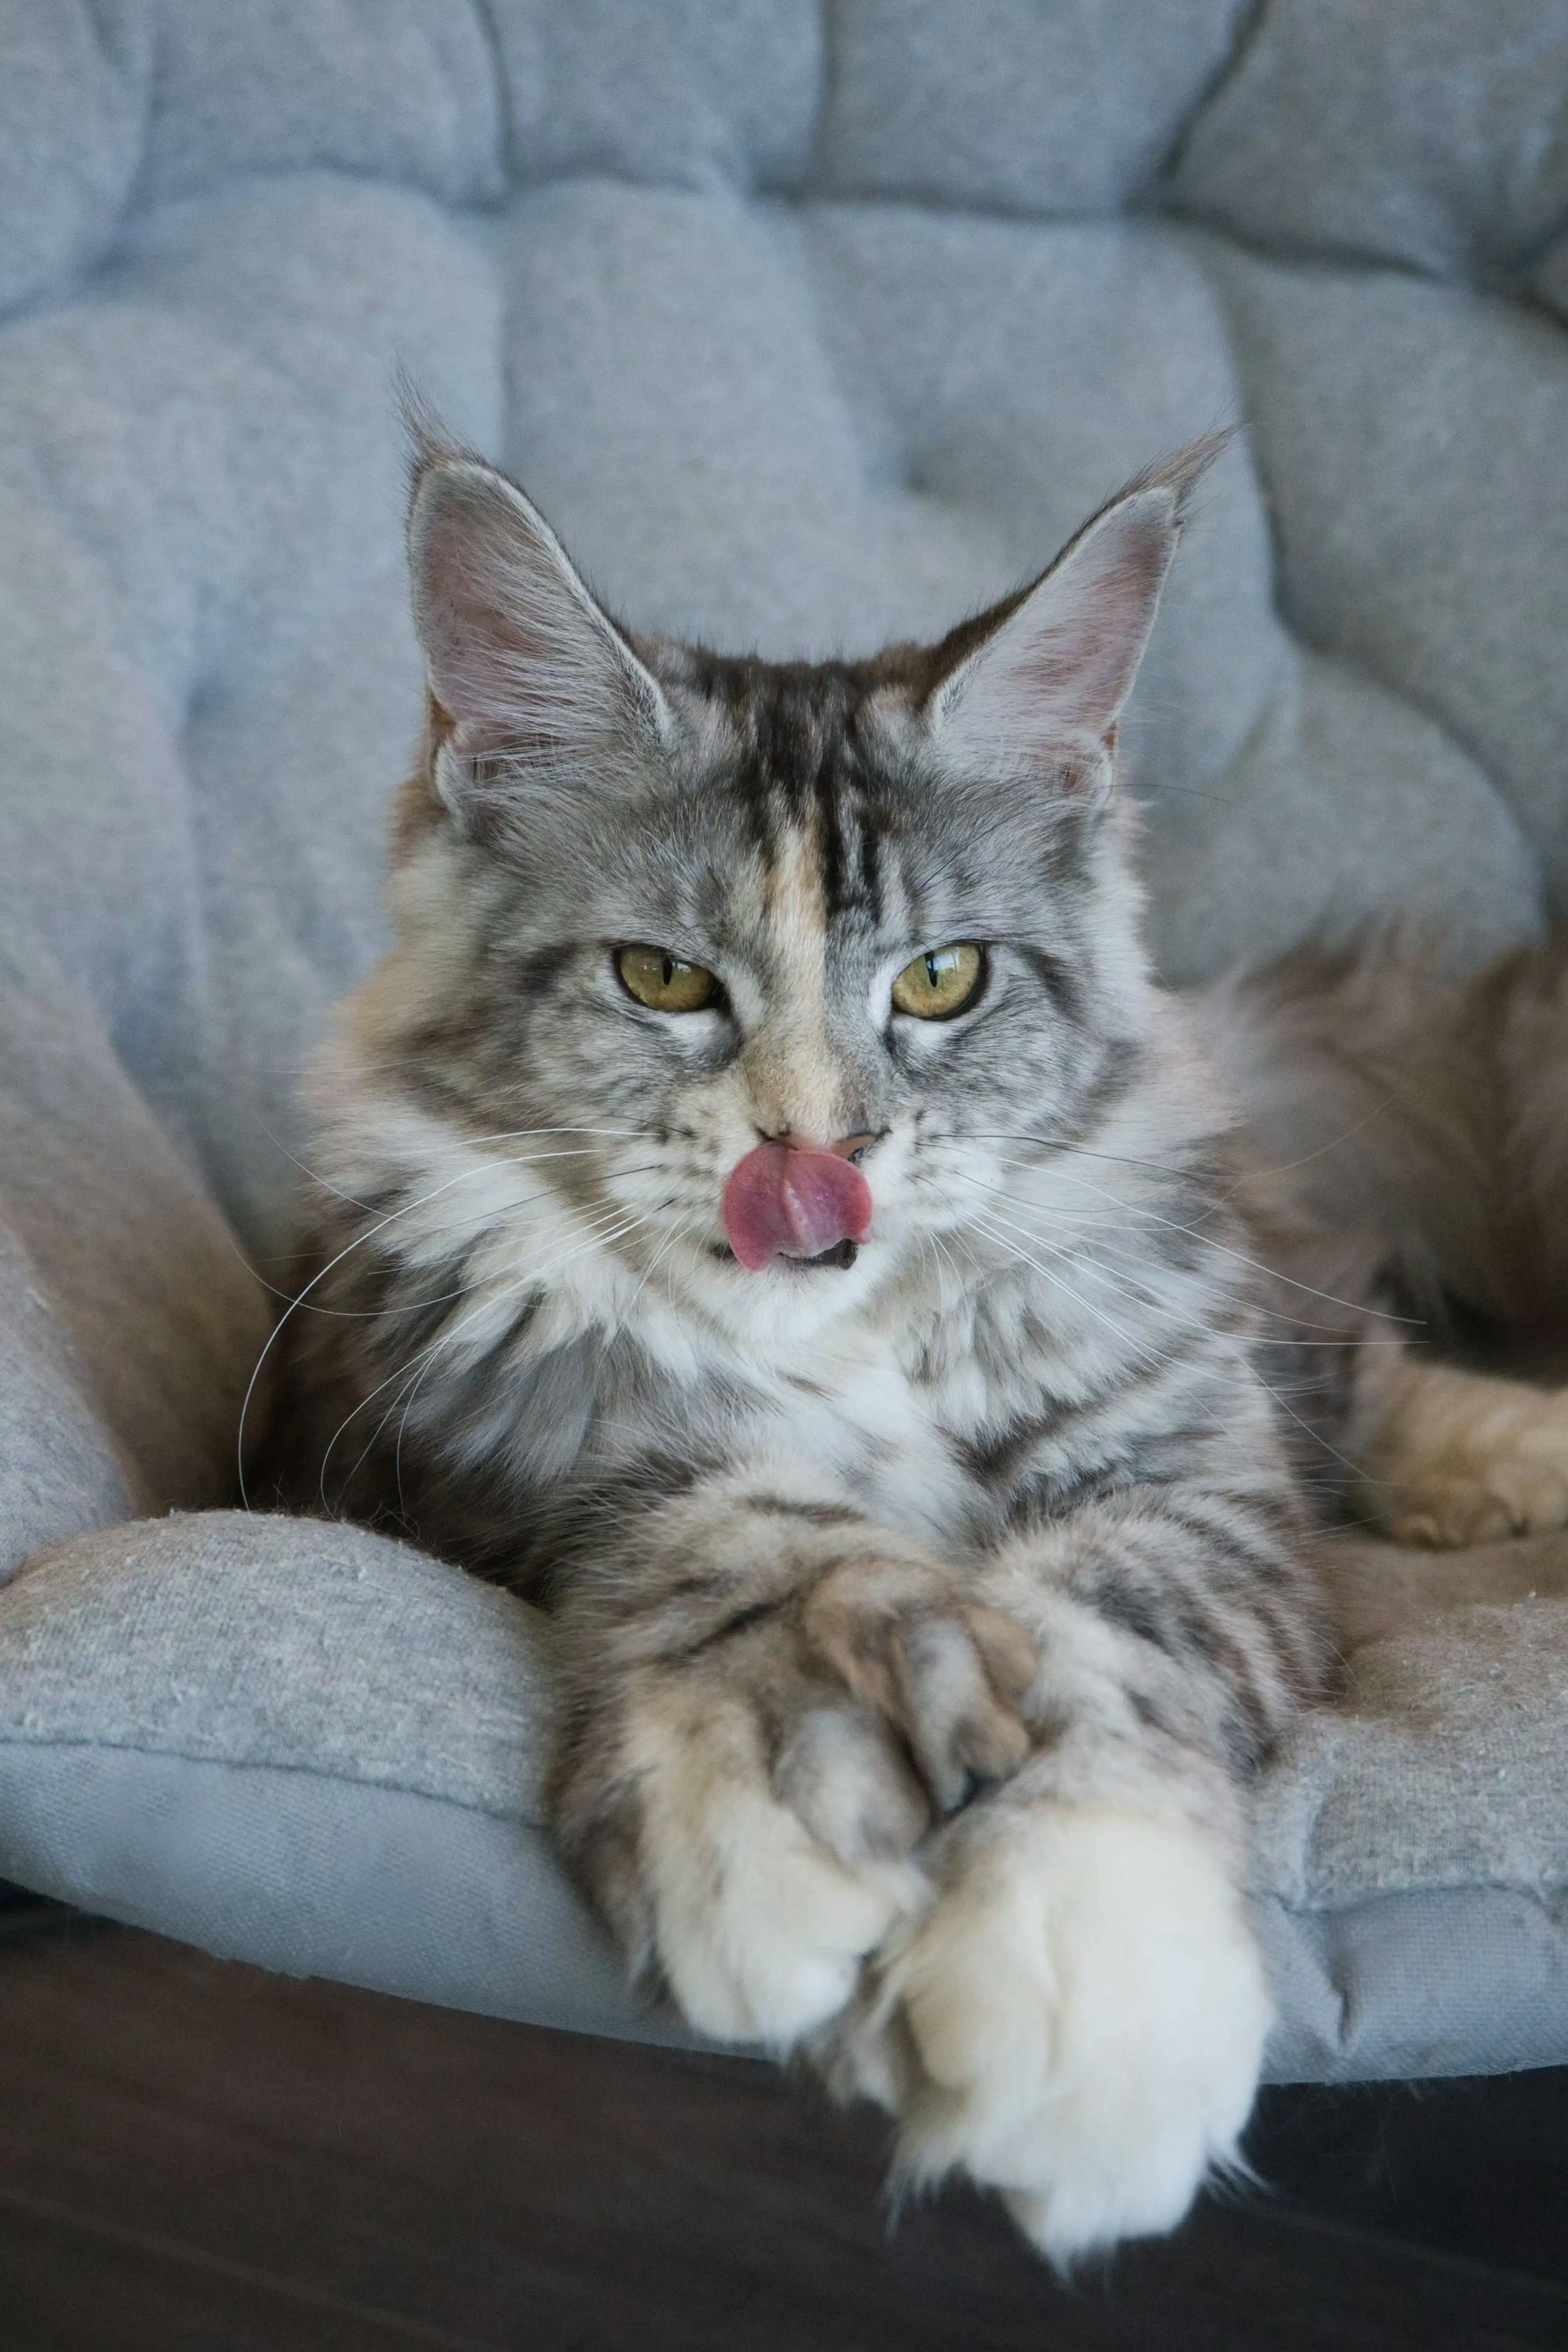 queen-aphrodite-of-slow-blink-maine-coons--ems-code-mco-fs-25--maine-coon-female-cat-2.jpeg